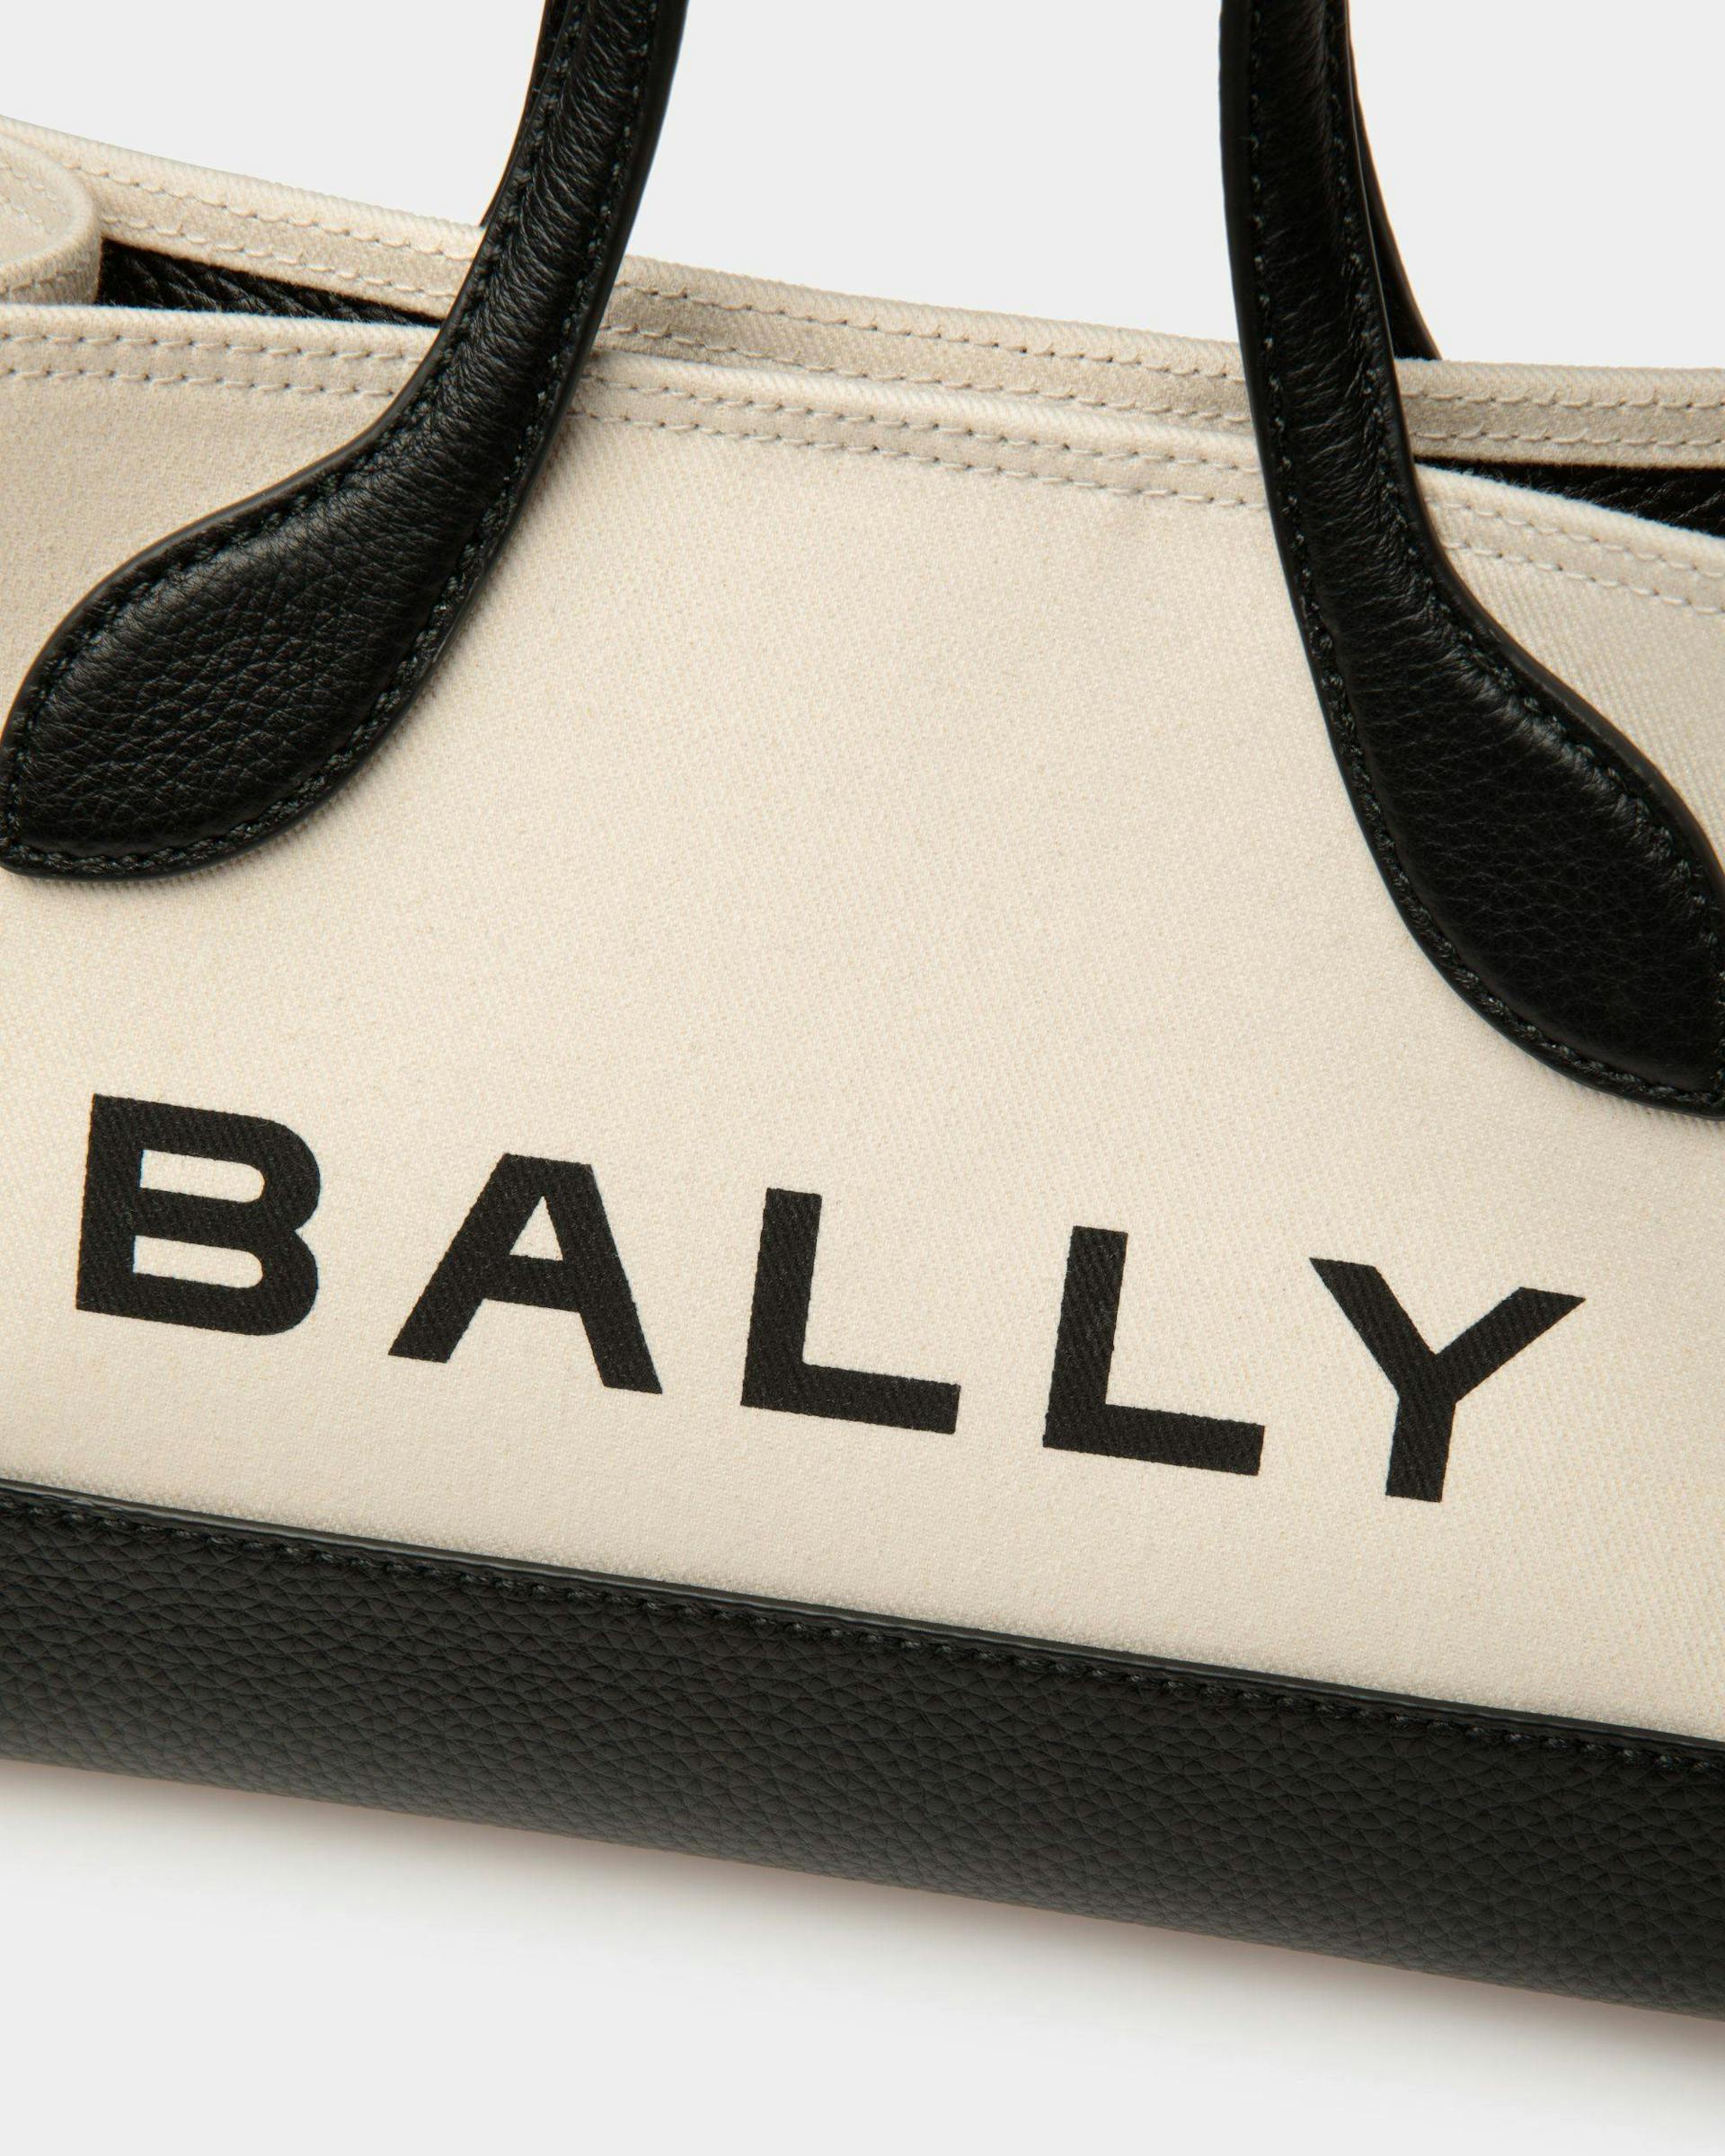 Bar Minibag In Natural And Black Fabric - Women's - Bally - 05